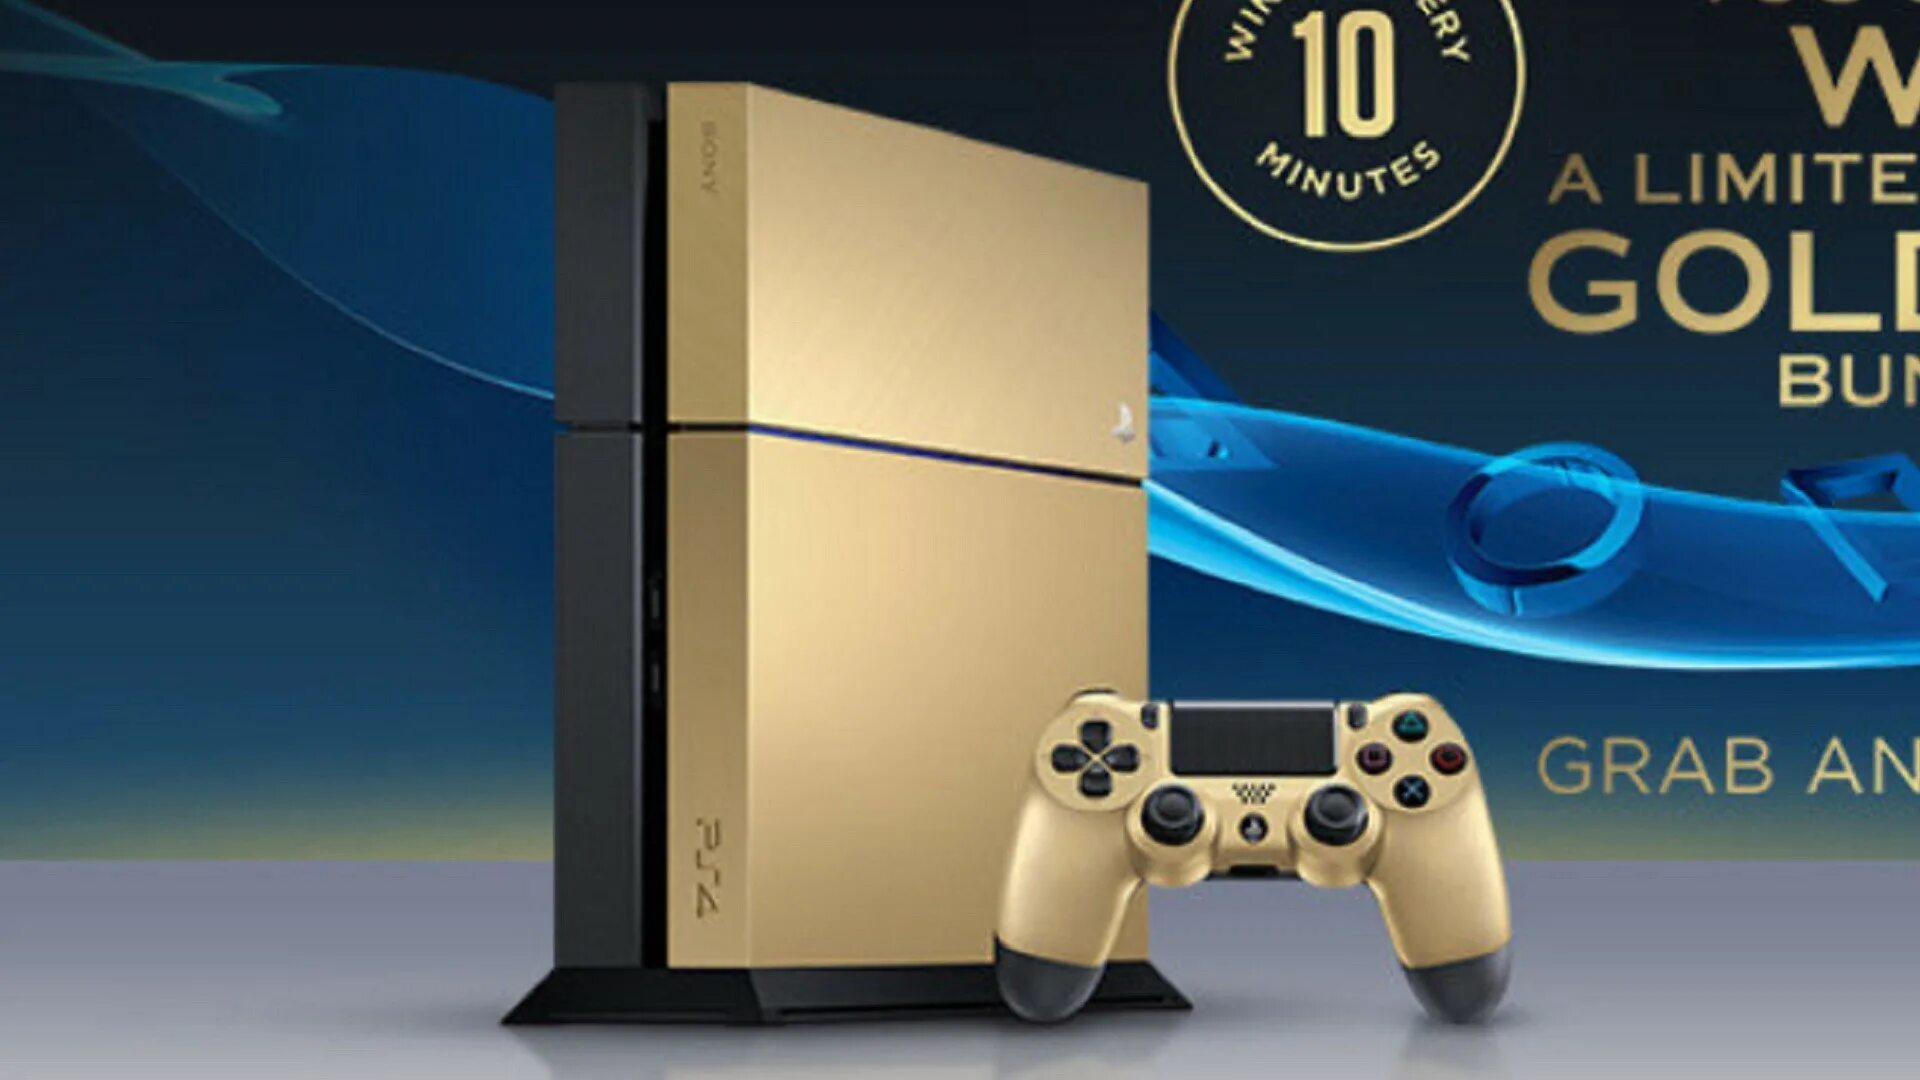 Ps4 gold edition. Sony Gold ps4 Limited Edition. ПС 4 фат Голд. Лимитированные ПС 4 фат. Ps4 fat Limited Edition.